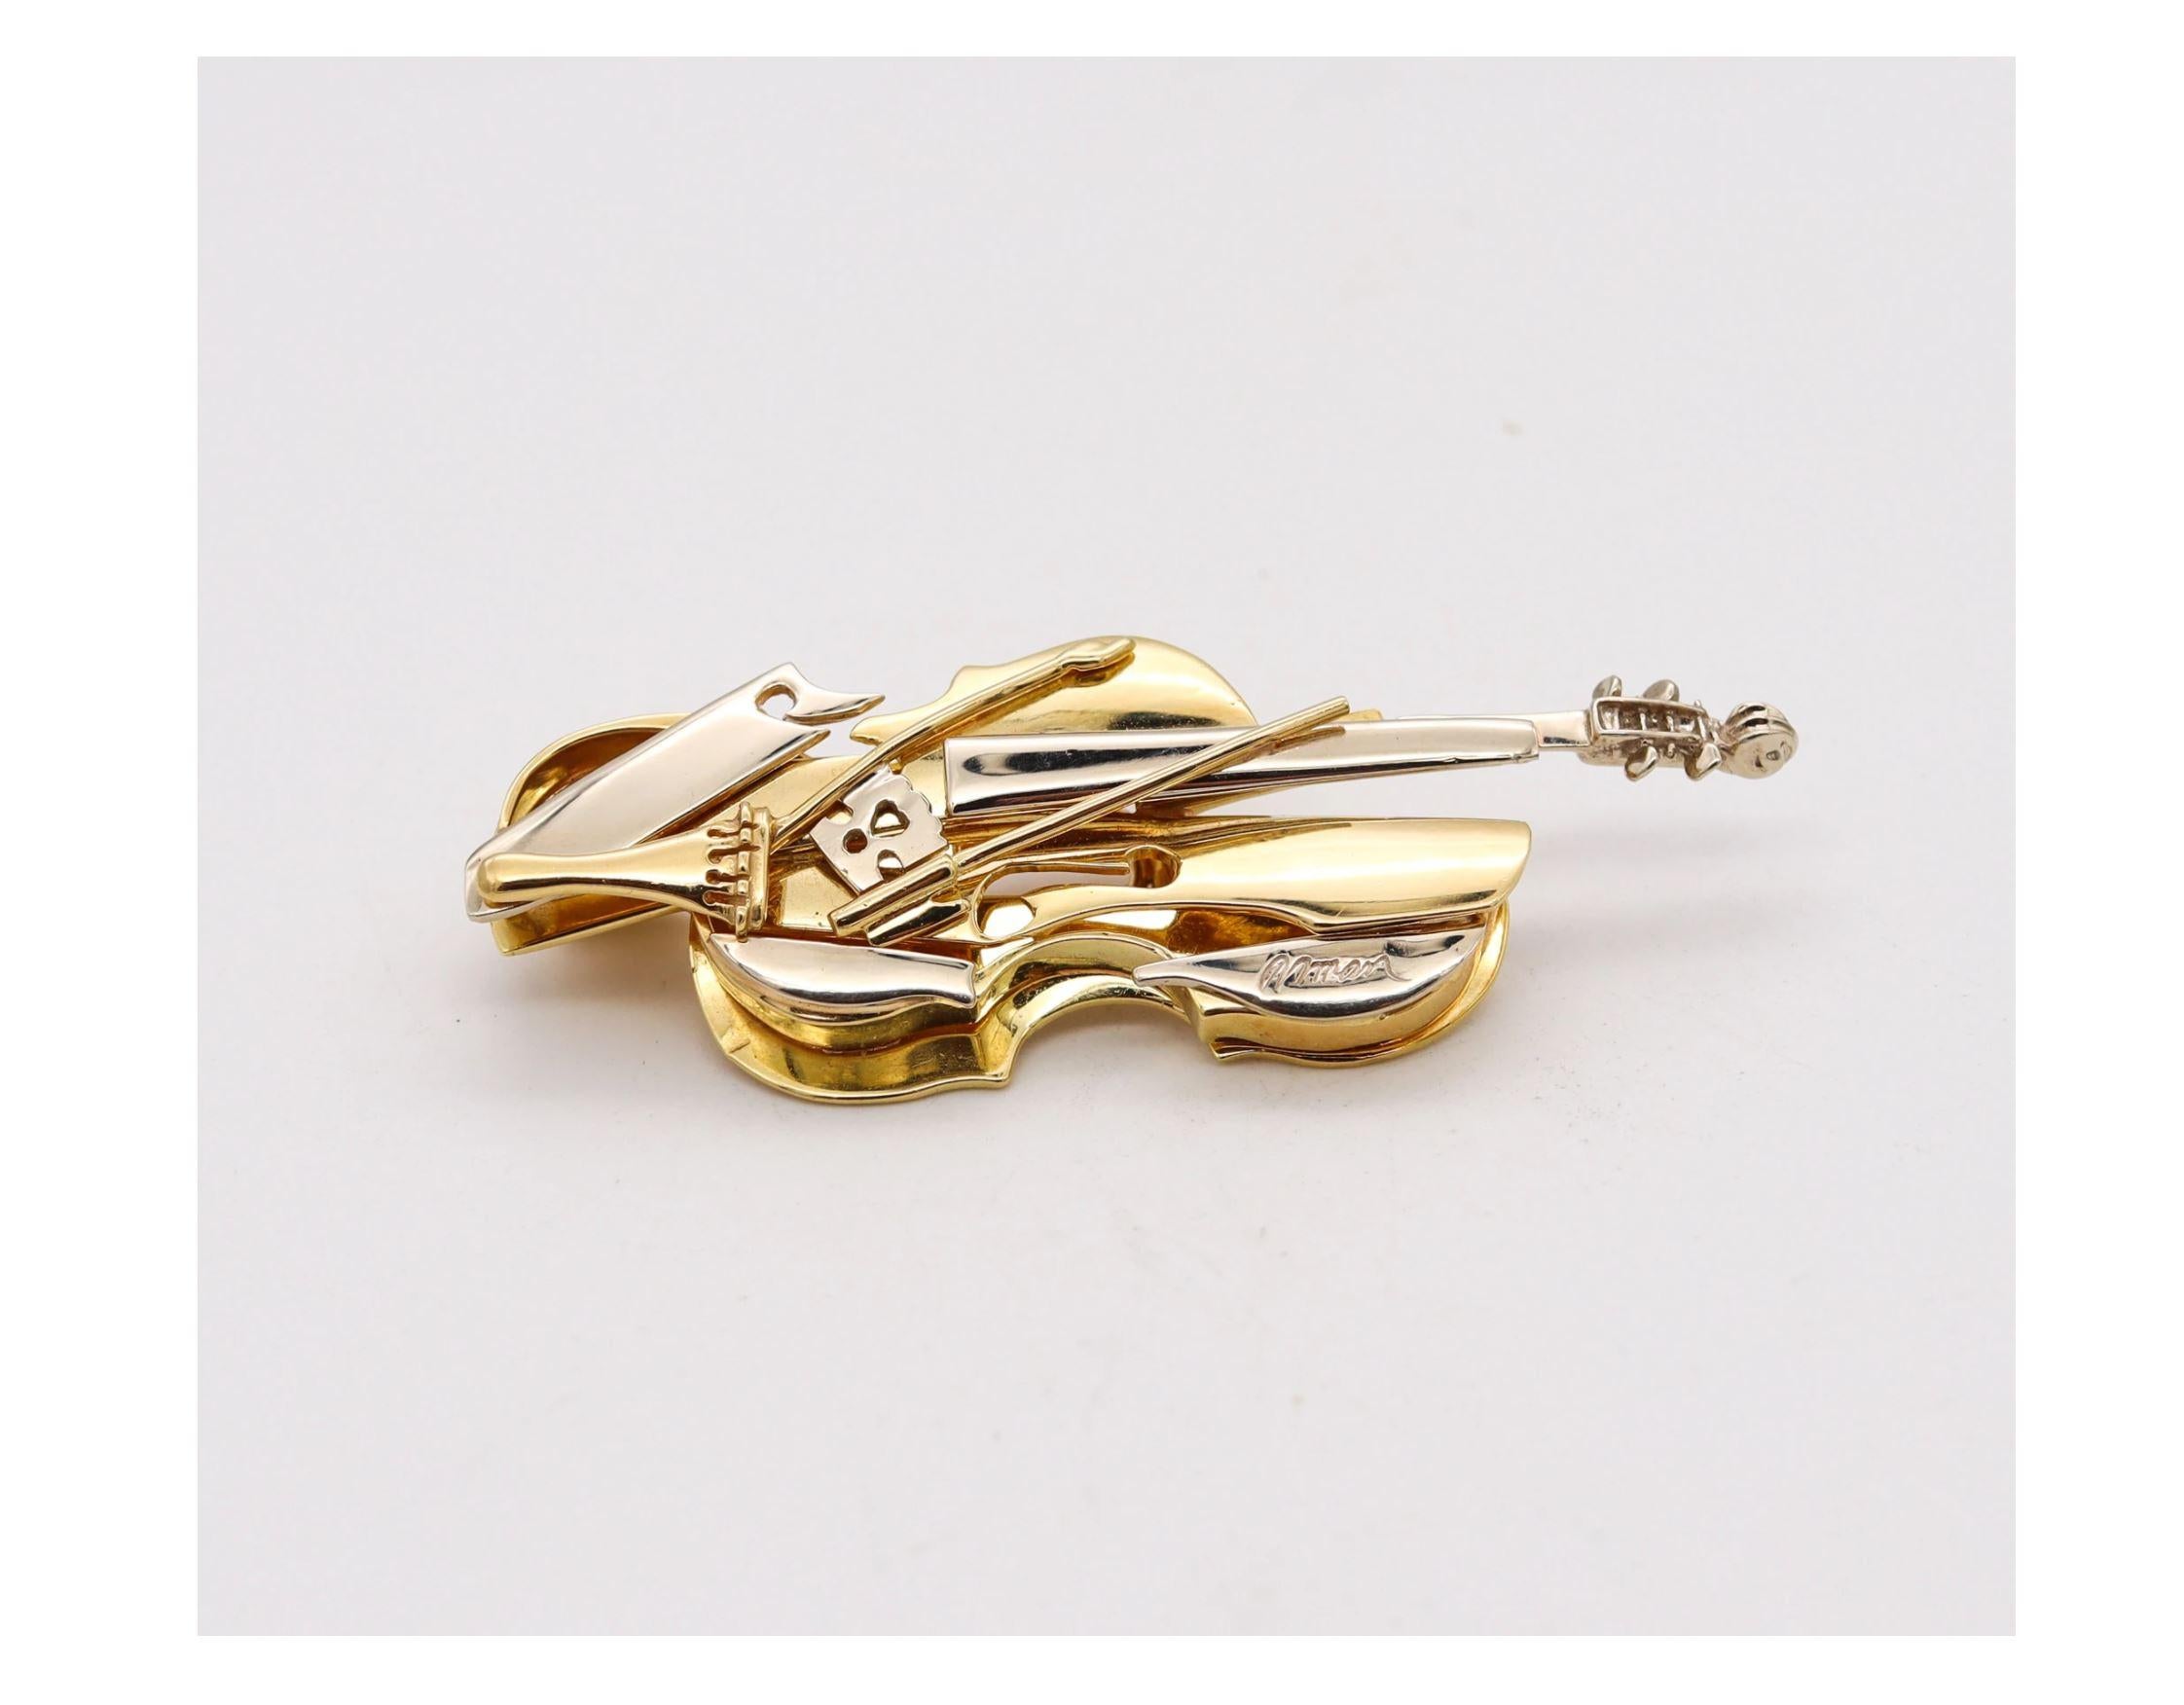 Deconstructed violin brooch designed by Pierre Arman (1928-2005)

Very rare wearable piece of art, created by Pierre Arman, back in the 1970's. The design of this jewelry brooch is composed by the deconstructed figure of a violin or cello, showing